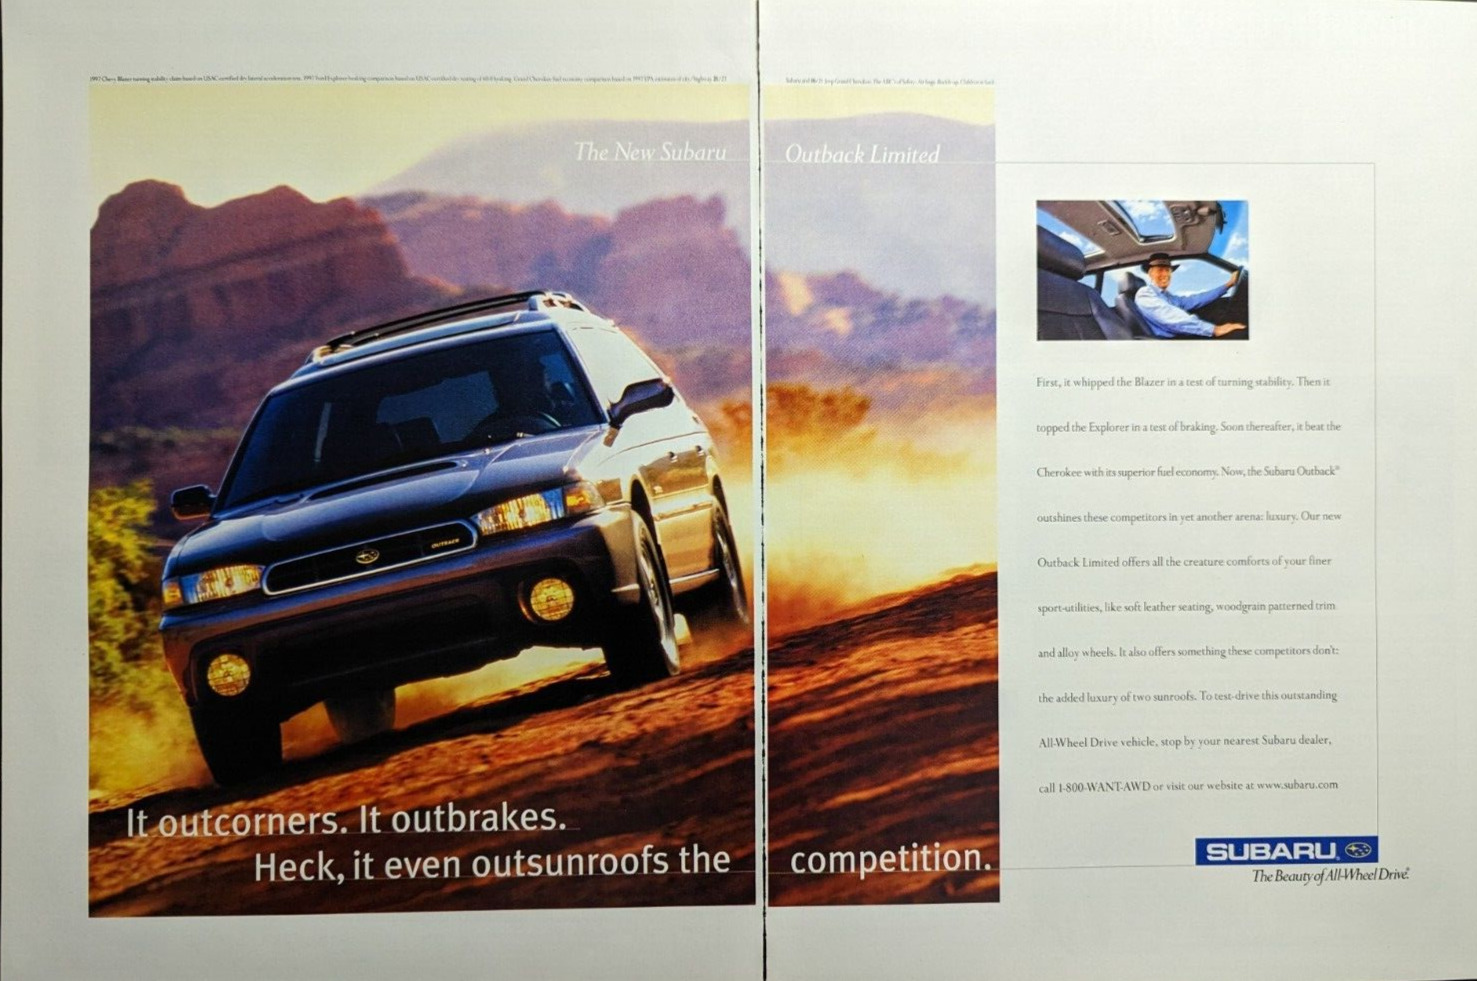 1998 Subaru Outback Limited Outcorners Outbrakes Competition Vintage Print Ad